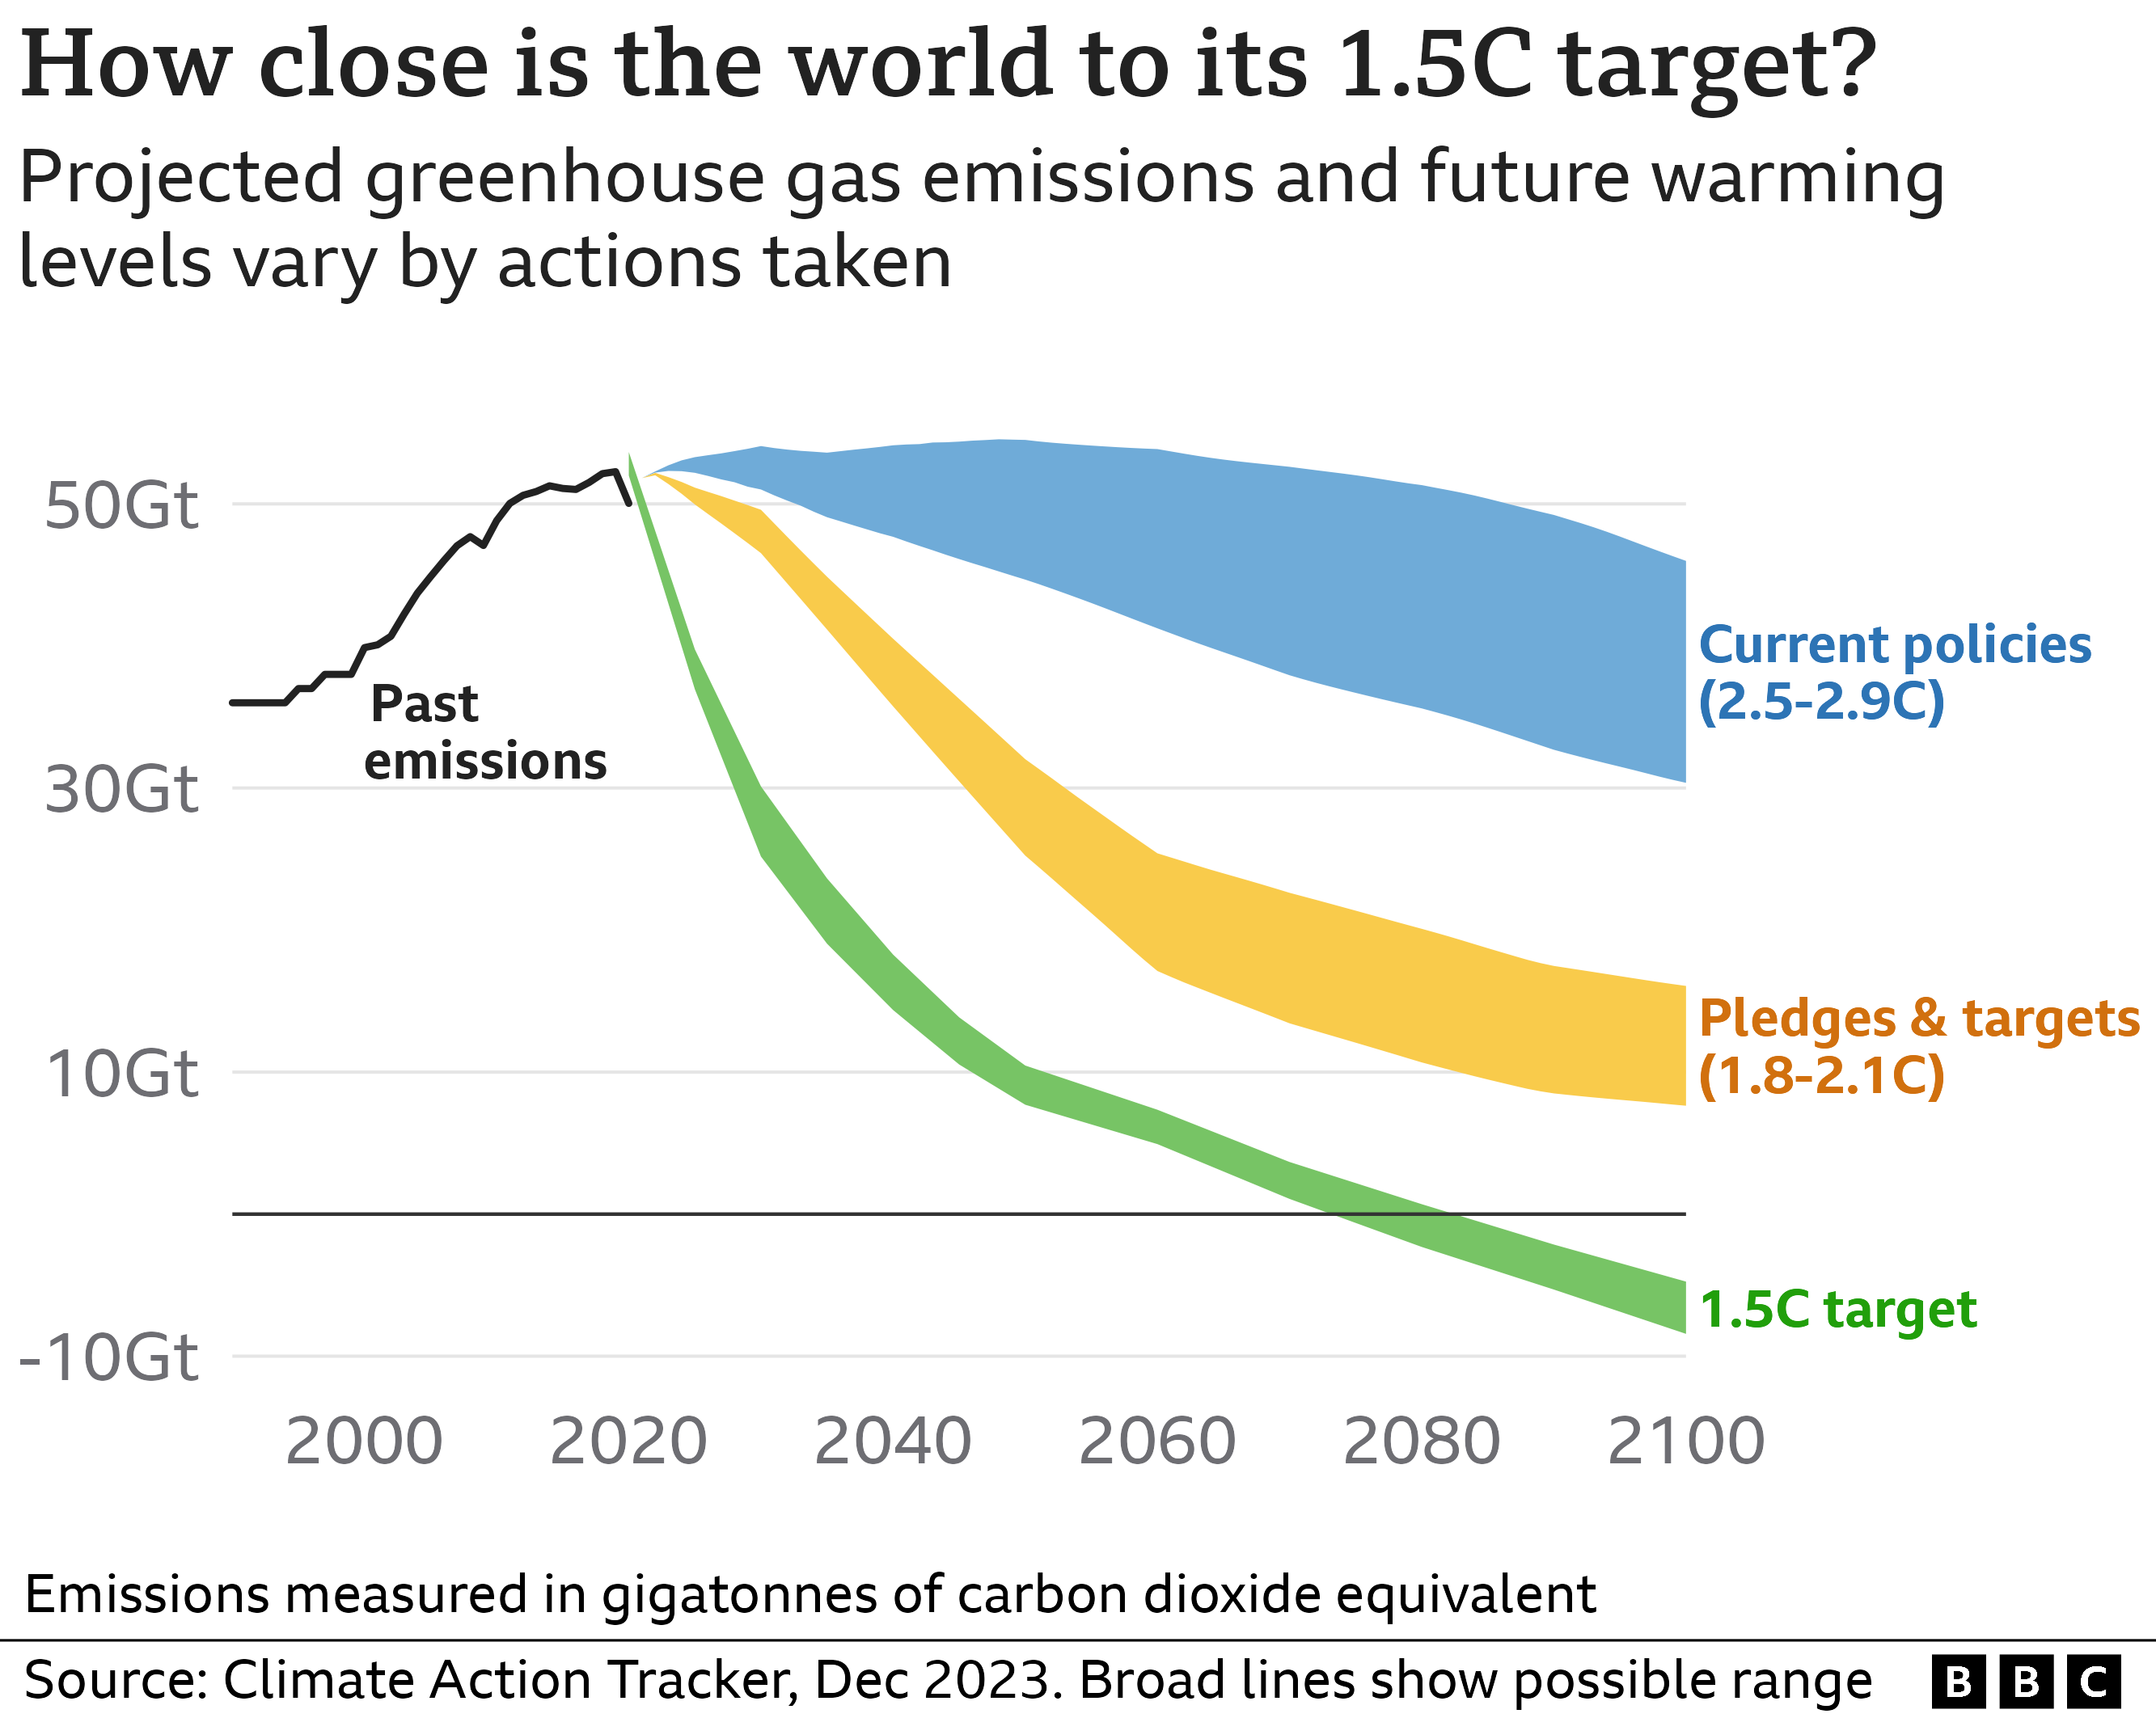 Line chart showing three different projected pathways for global emissions and their respective levels of warming by the year 2100. If current policies are pursued, the world could still see 2.5-2.9 degrees warming; if all pledges and targets are met, 2.0 degrees of warming. But in order to reach the target of 1.5C or less, global annual emissions need to sharply decrease beyond either set of actions.